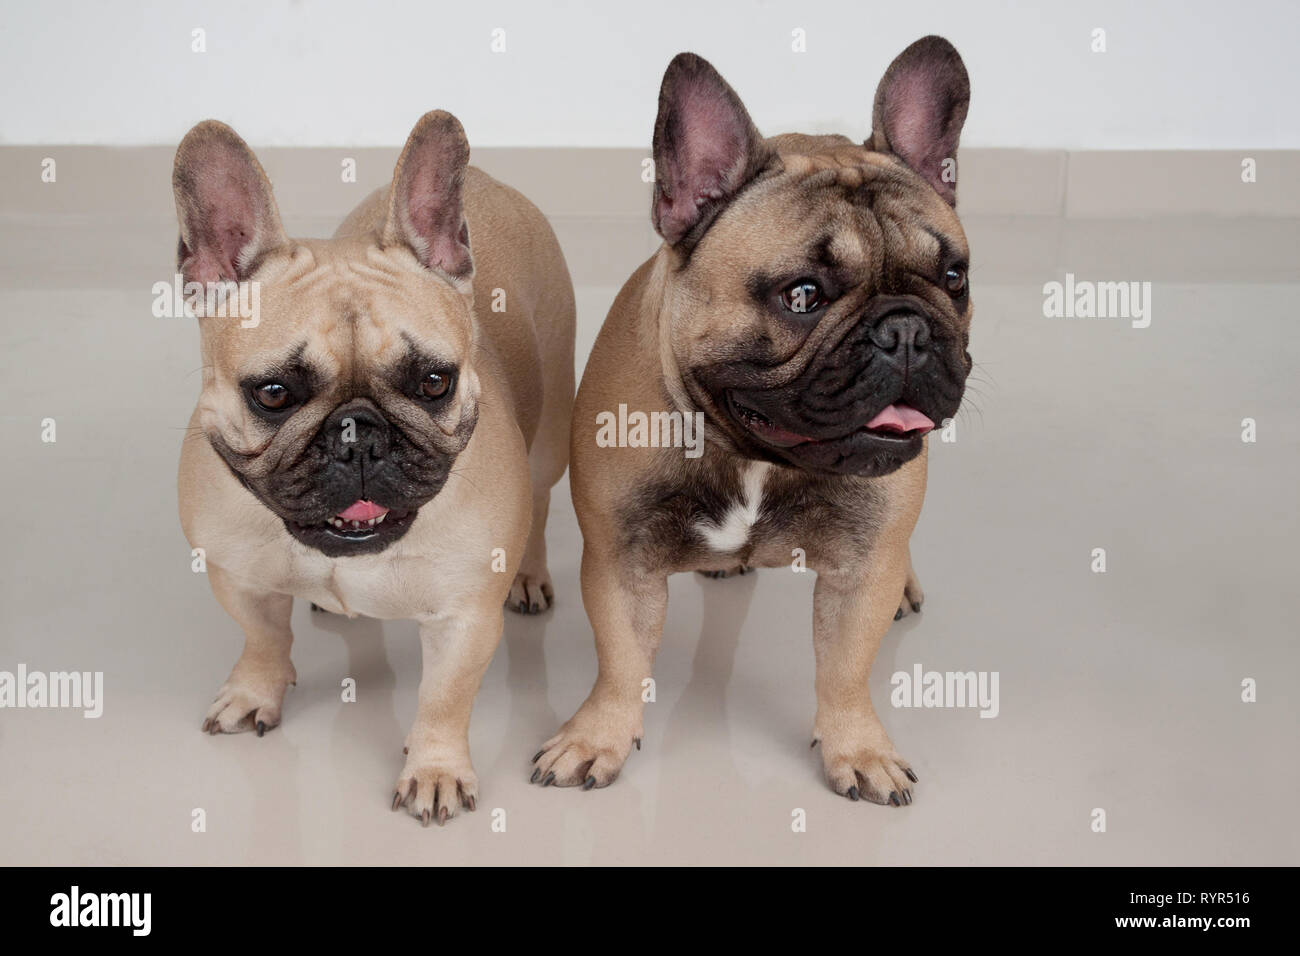 Two Cute French Bulldog Puppies Are Standing On Tiled Floor Pet